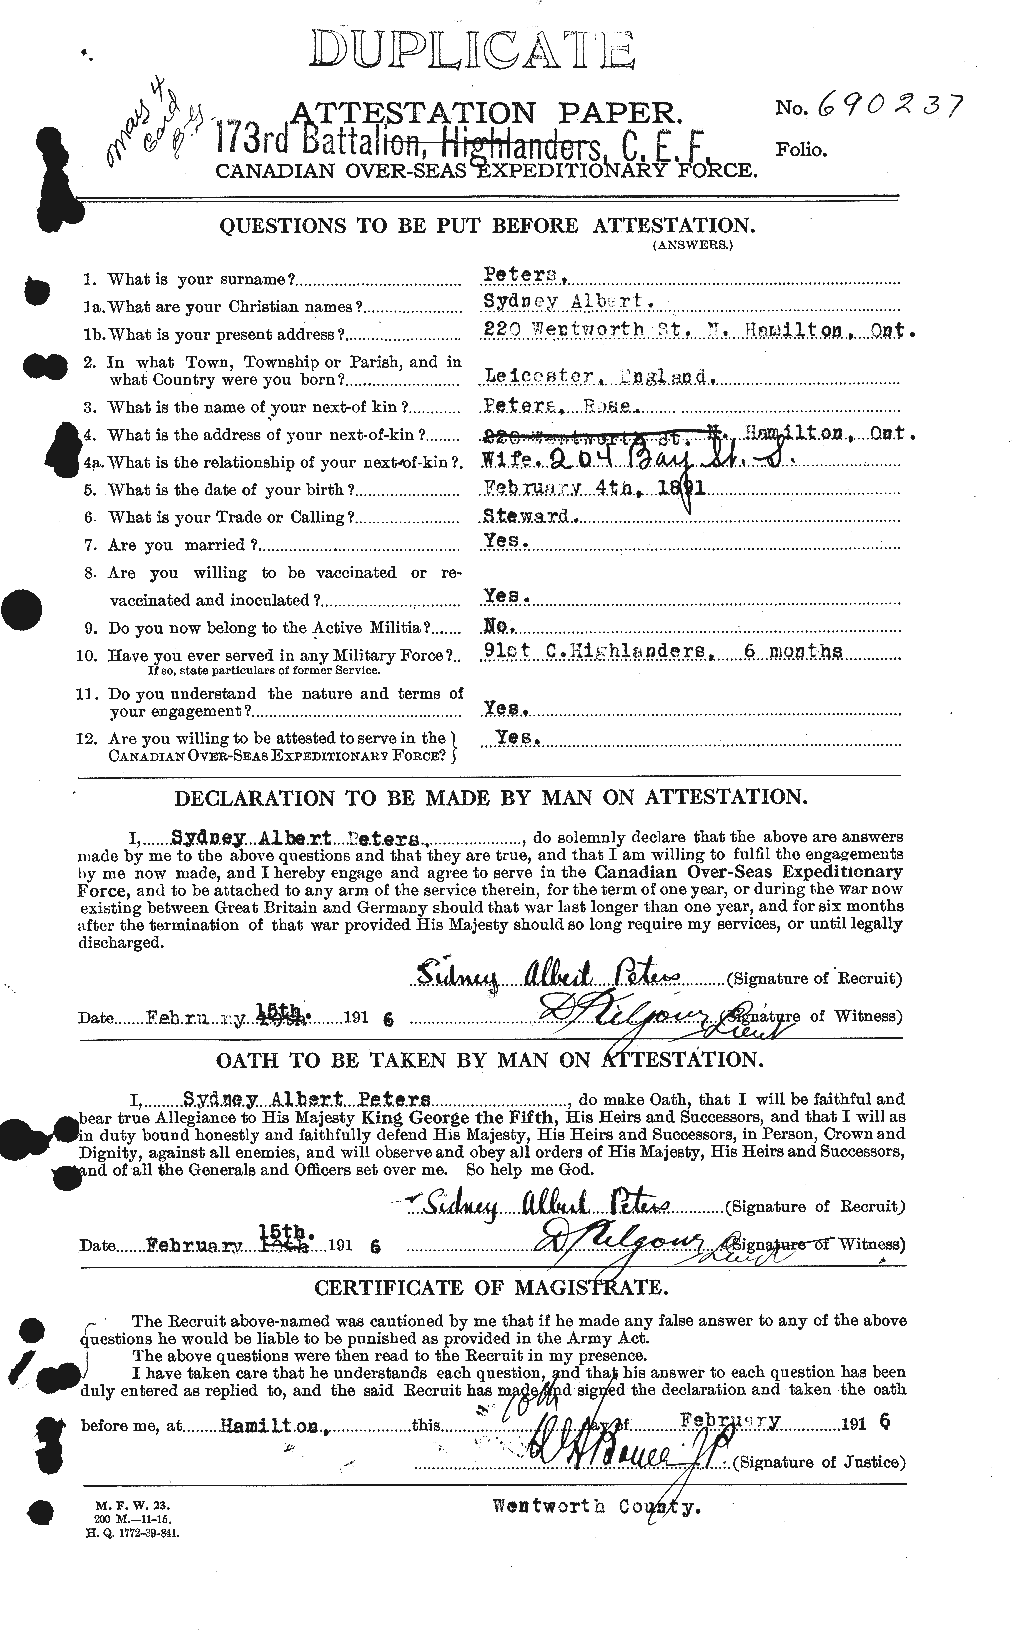 Personnel Records of the First World War - CEF 575626a